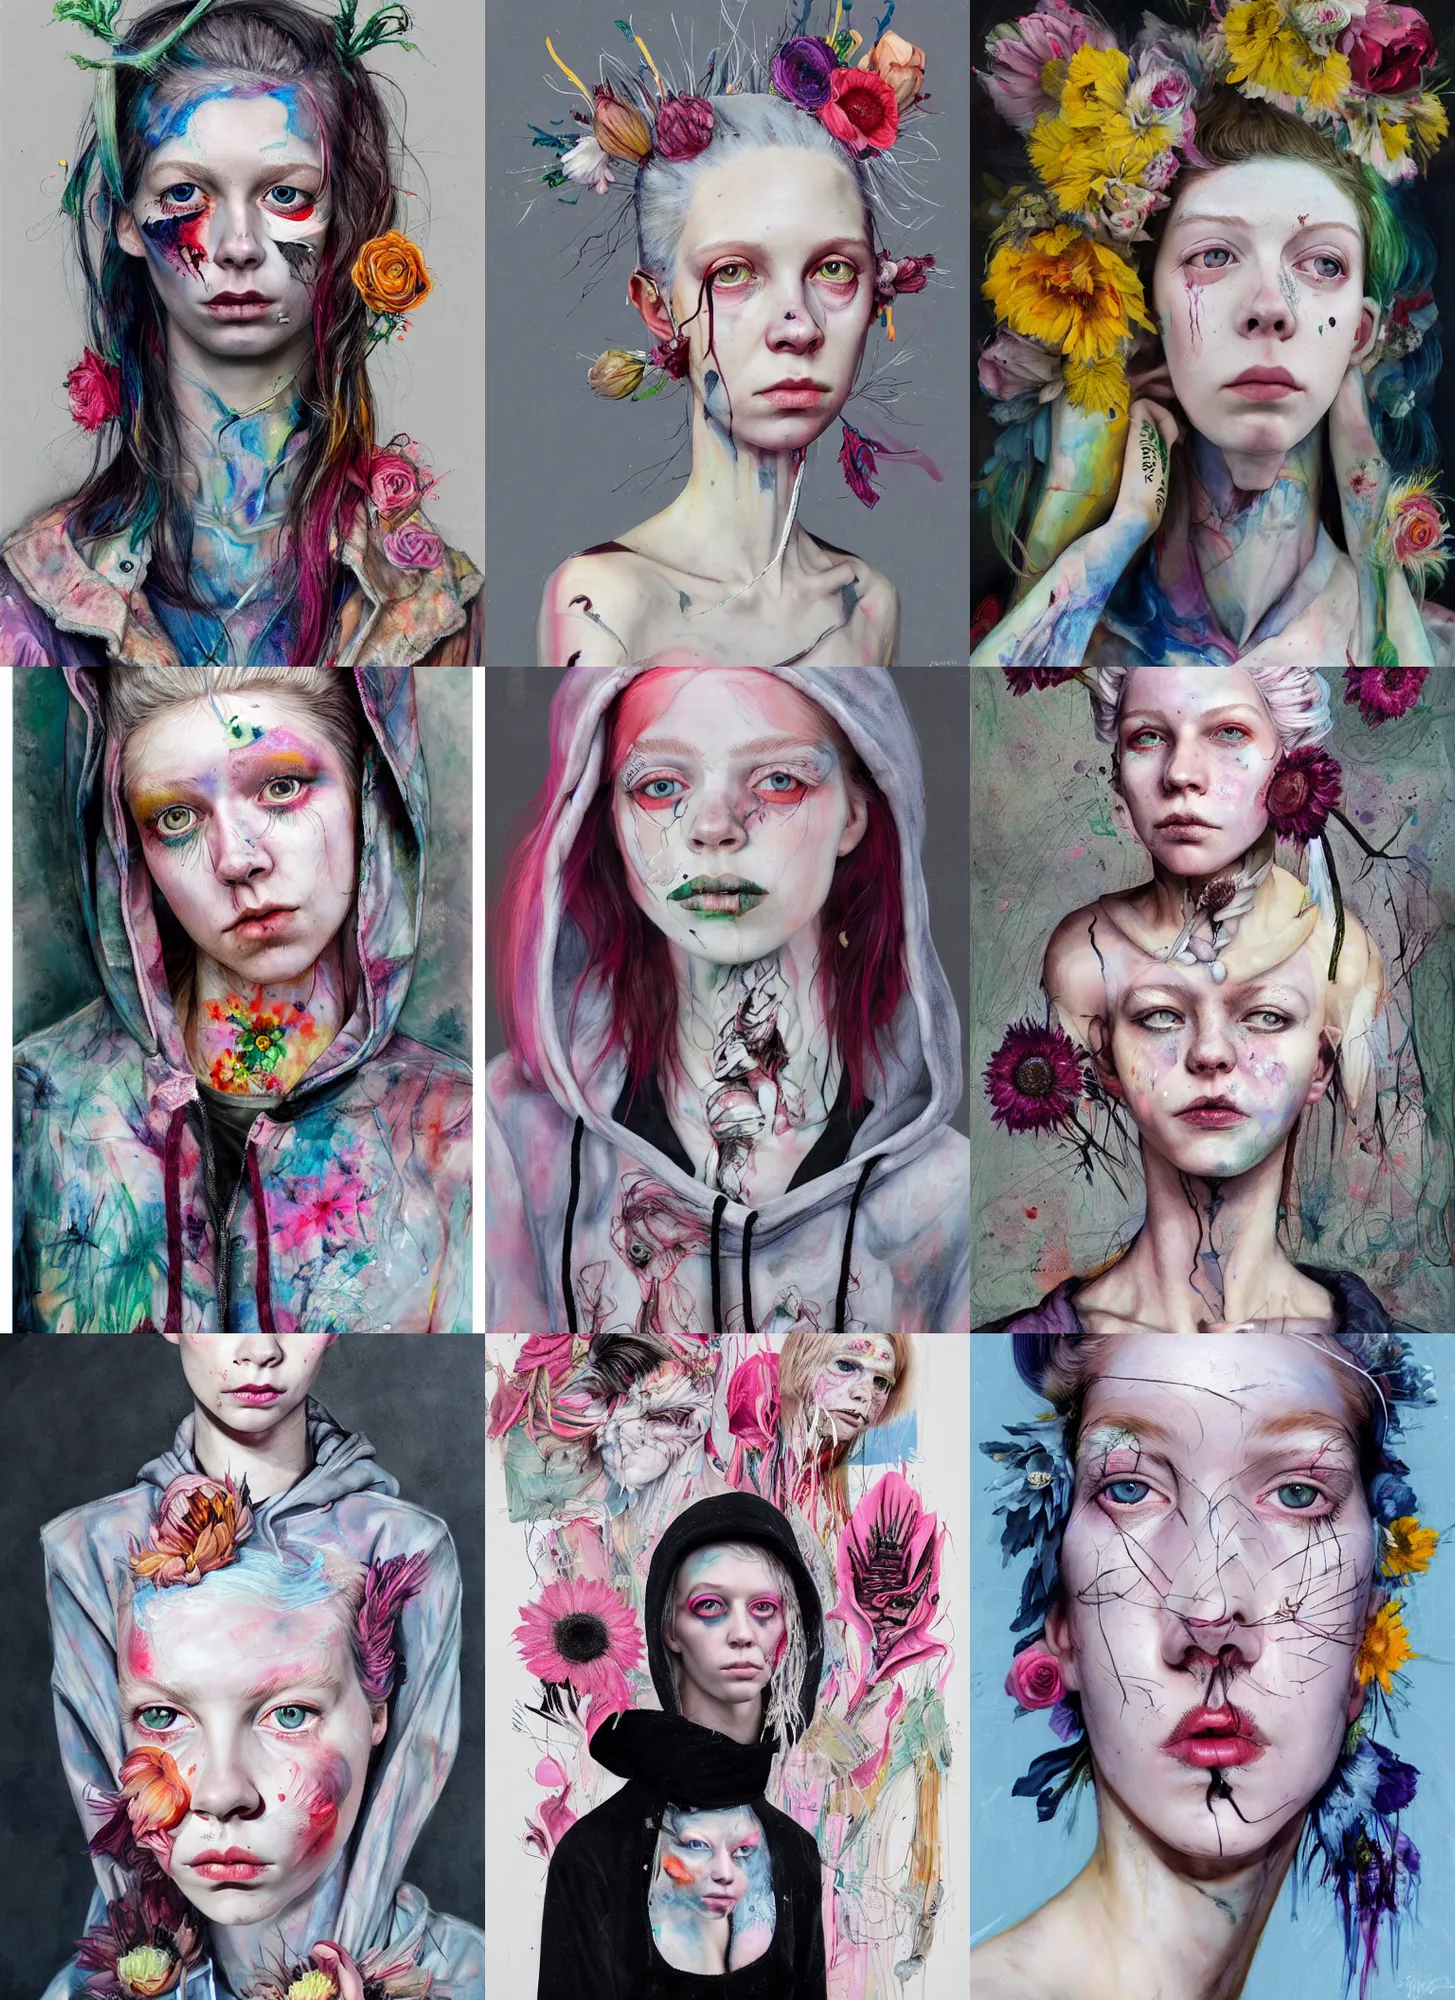 Prompt: 2 5 year old hunter schafer in the style of martine johanna and! jenny saville!, wearing a hoodie, standing in a township street, street fashion outfit, haute couture fashion shoot, mascara, full figure painting by mab graves, jeremy mann, david choe, decorative flowers, 2 4 mm, die antwoord yolandi visser